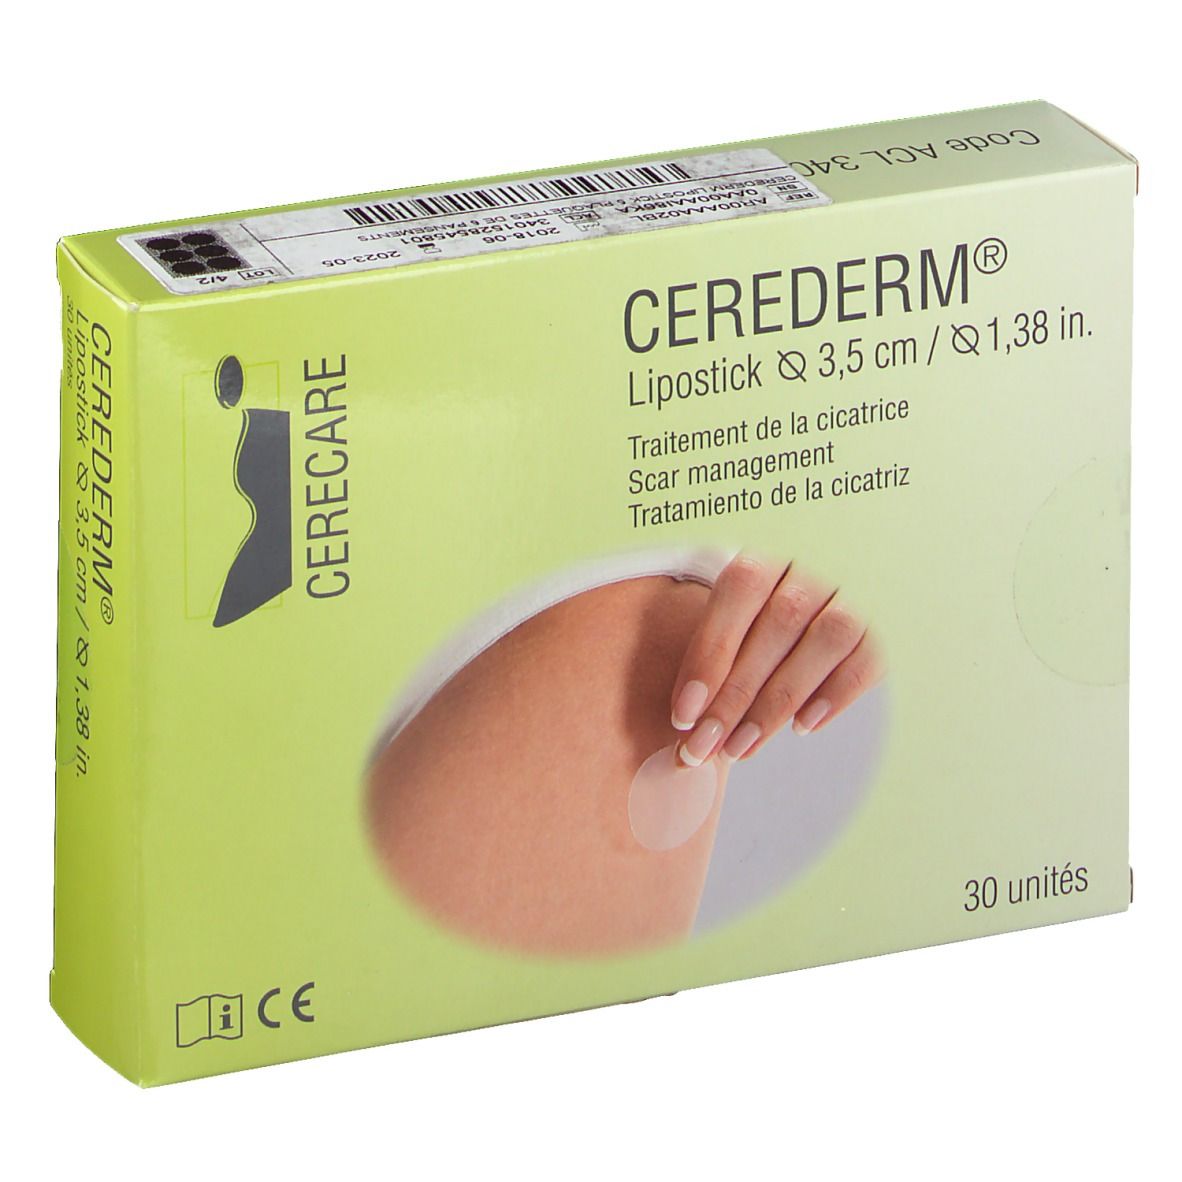 Silicone dressing - Cerederm® Self-adhesive - Euromi